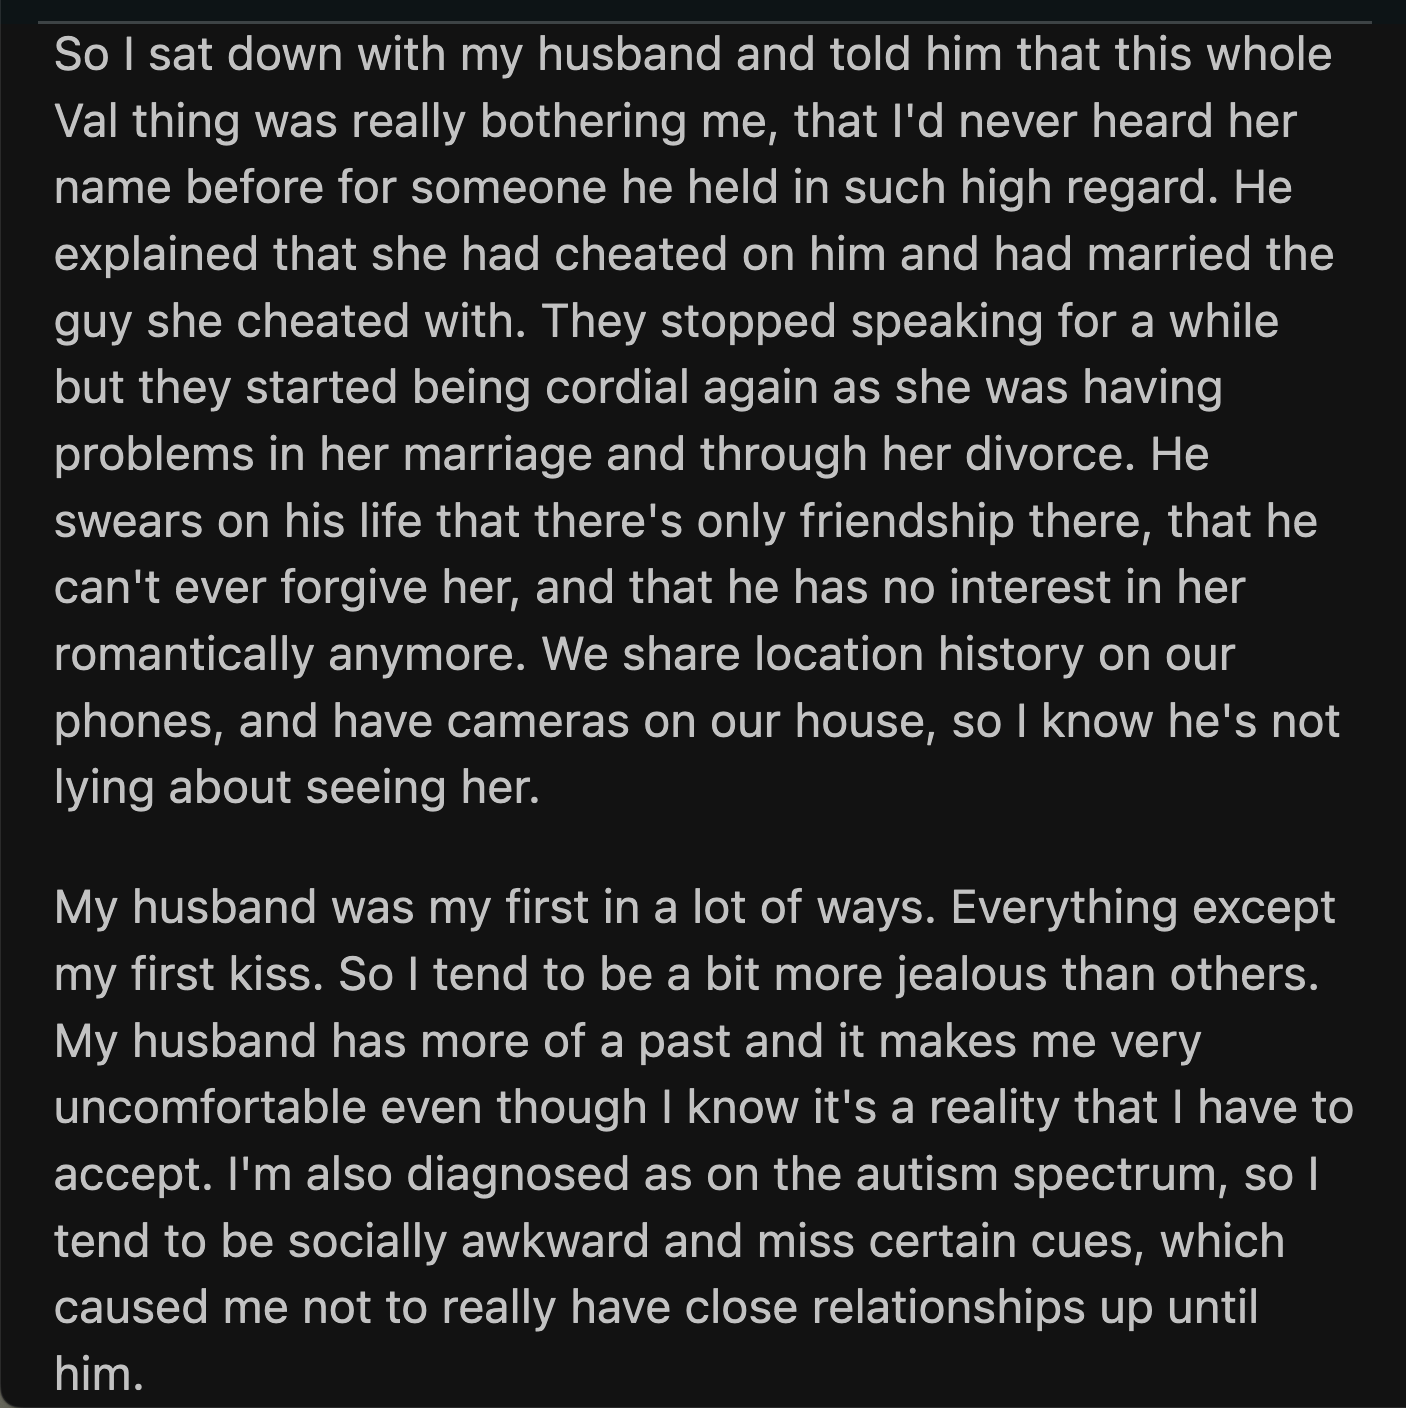 Her husband explained that he would never be back with Val because he still resented her for cheating on him. OP admitted she was insecure about his past relationships as he was her first in most things.